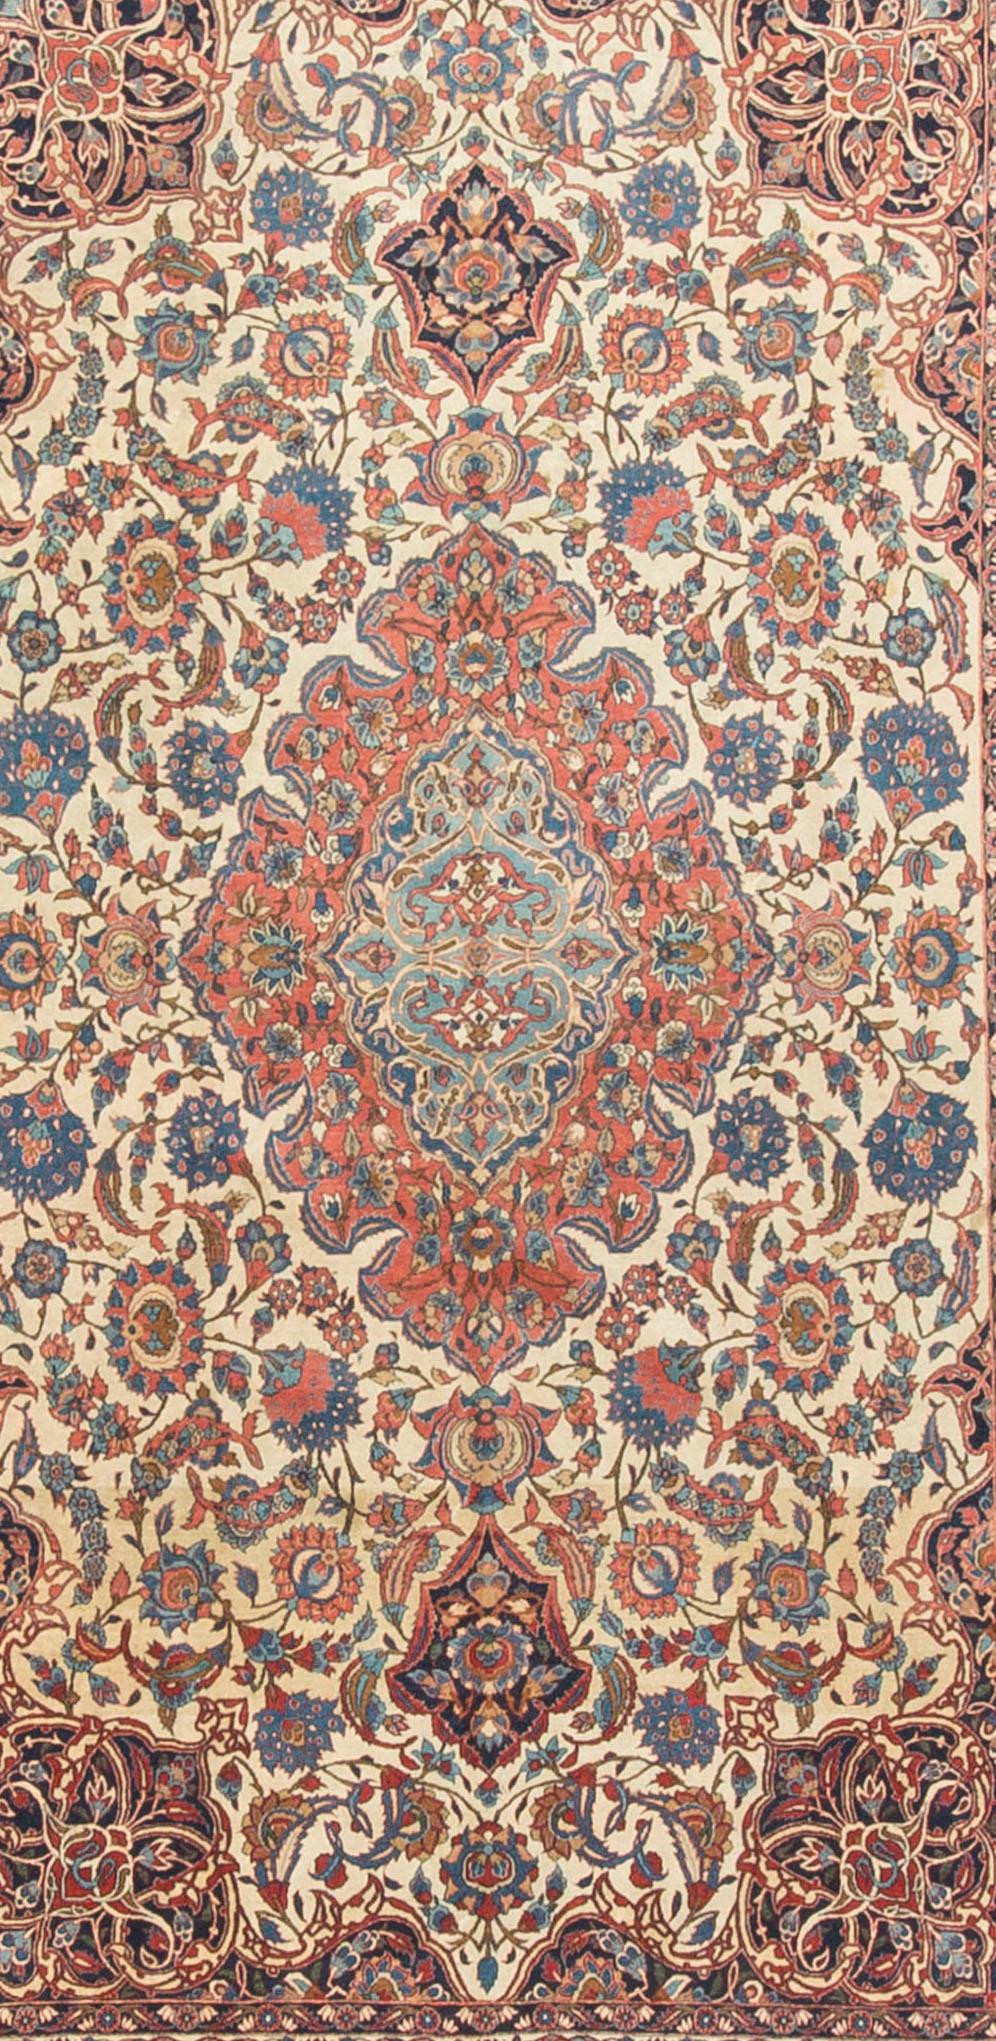 Antique Persian Isfahan rug with a central medallion in soft blues surrounded by a floral design in gentle reds all encompassed in an ivory field with the corner spandrels in deep blues. The main border and two guard borders complete this picture of